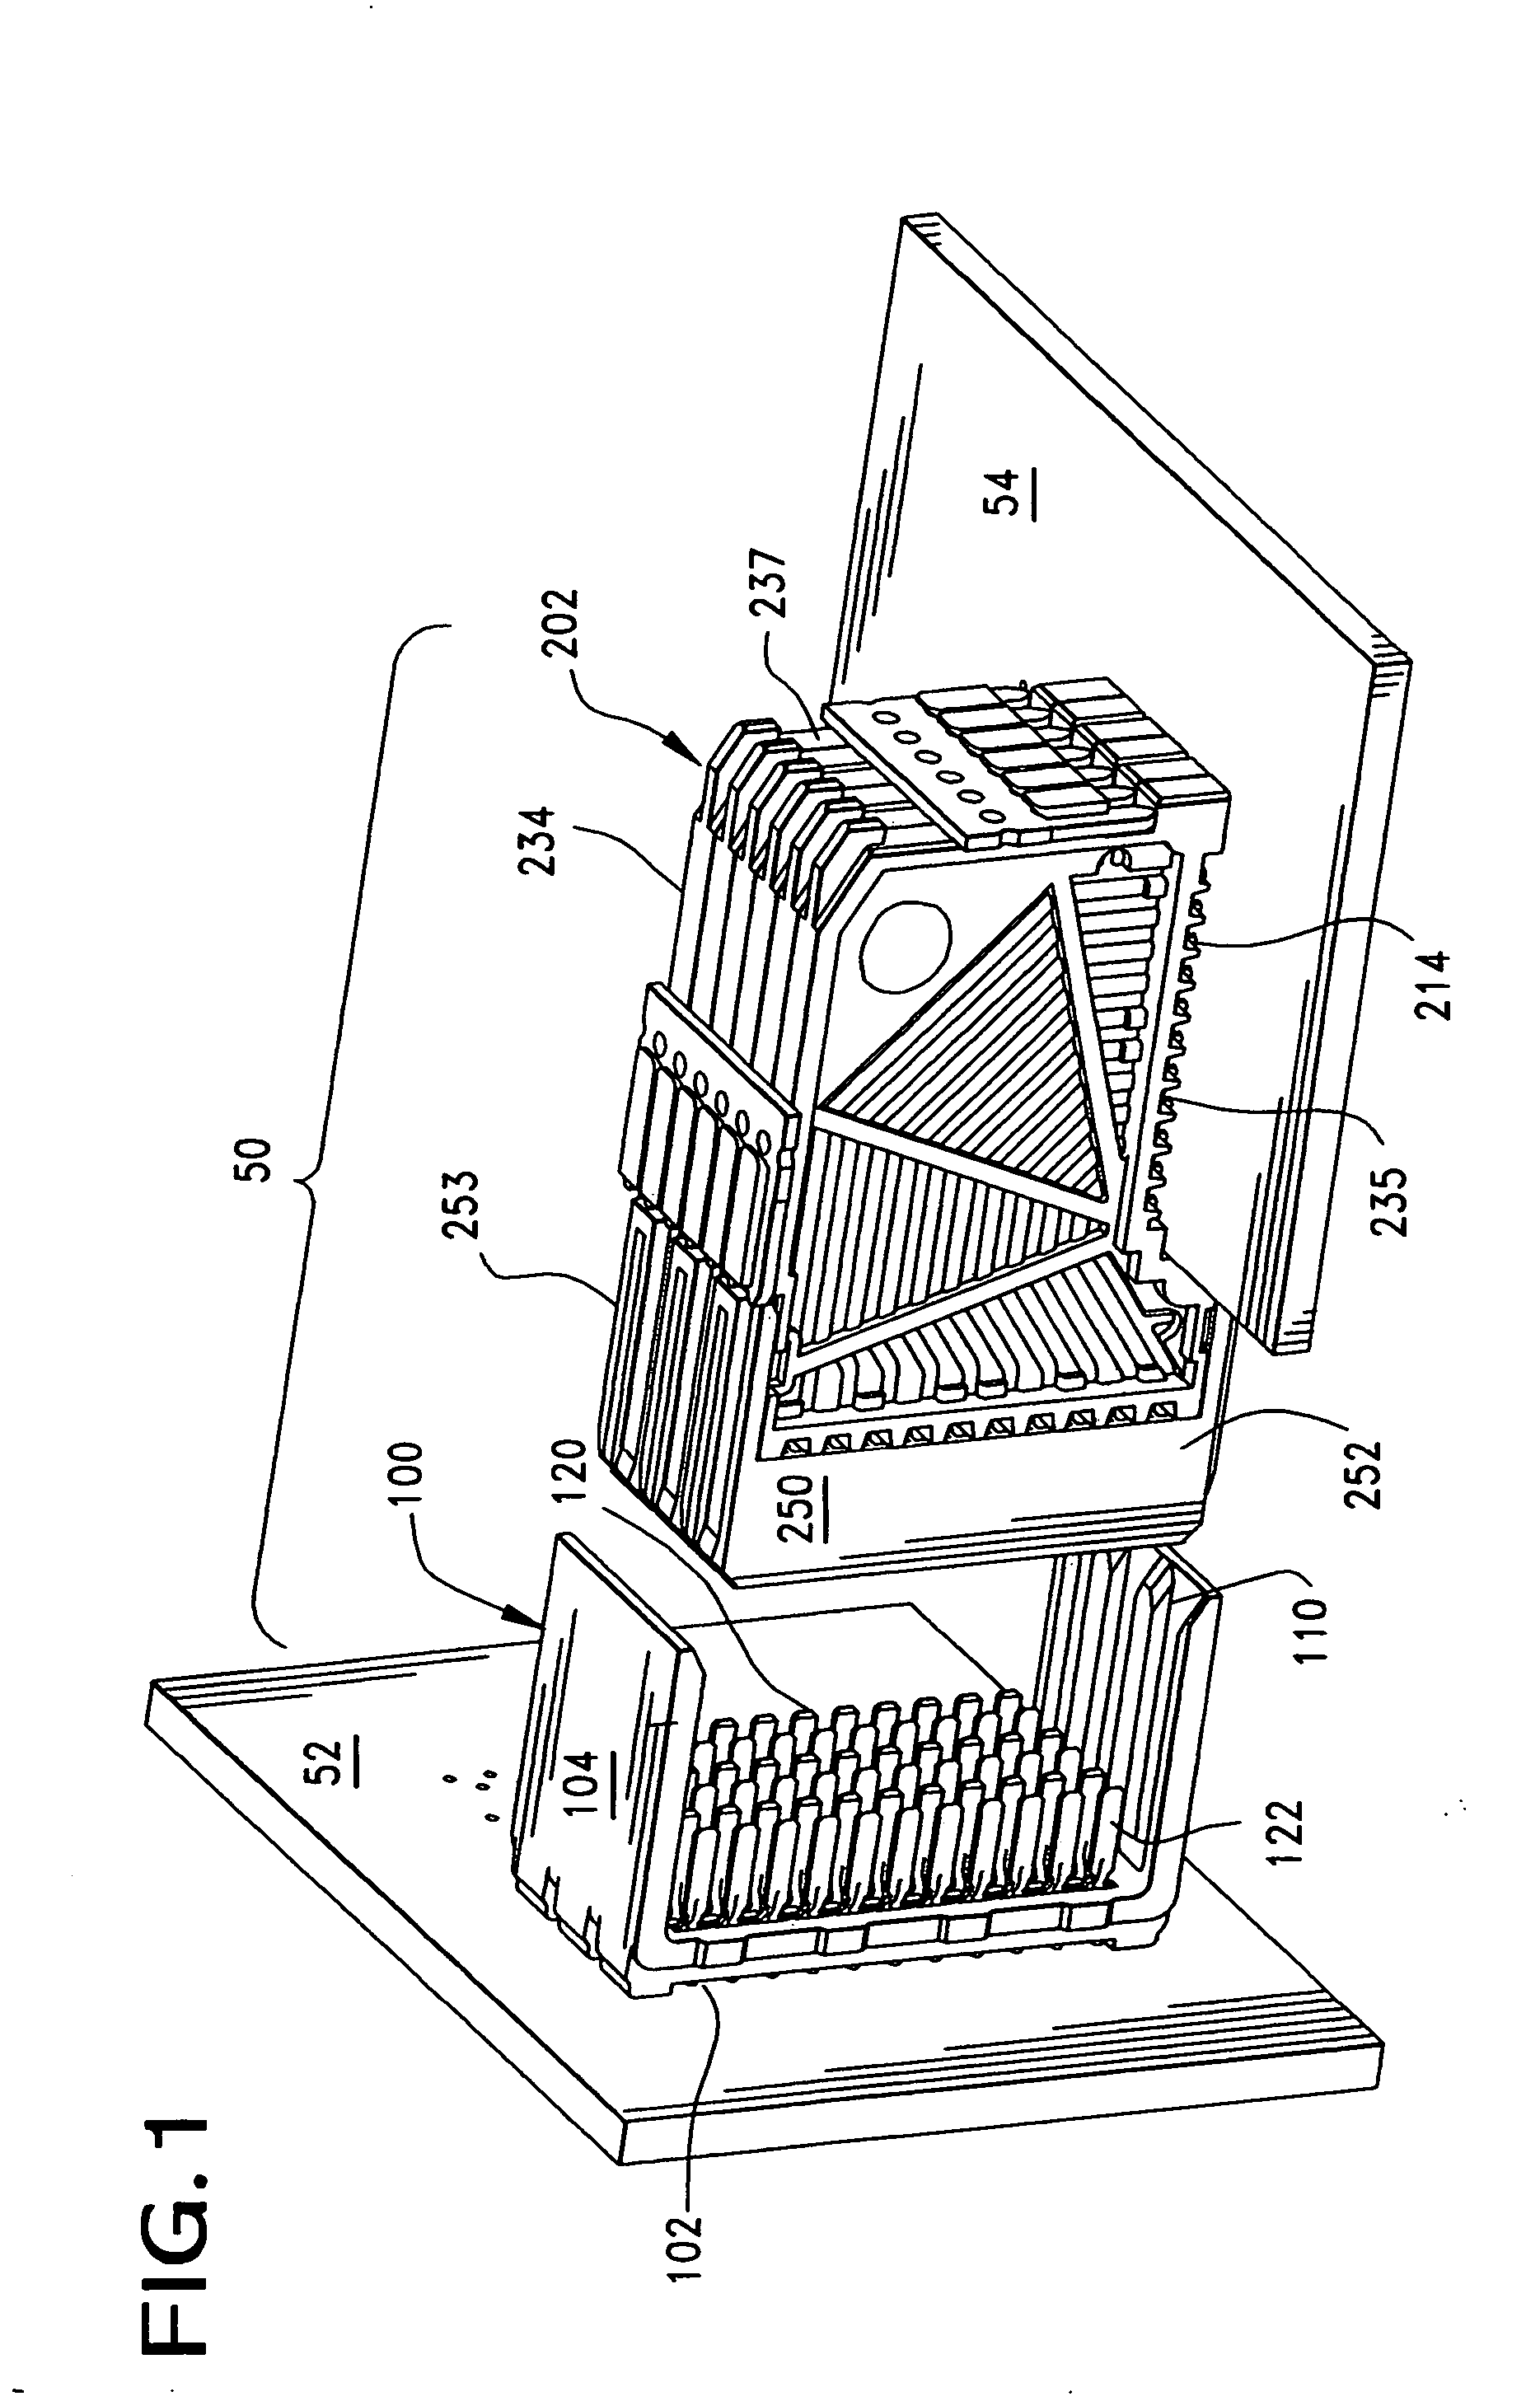 High-density, robust connector with guide means